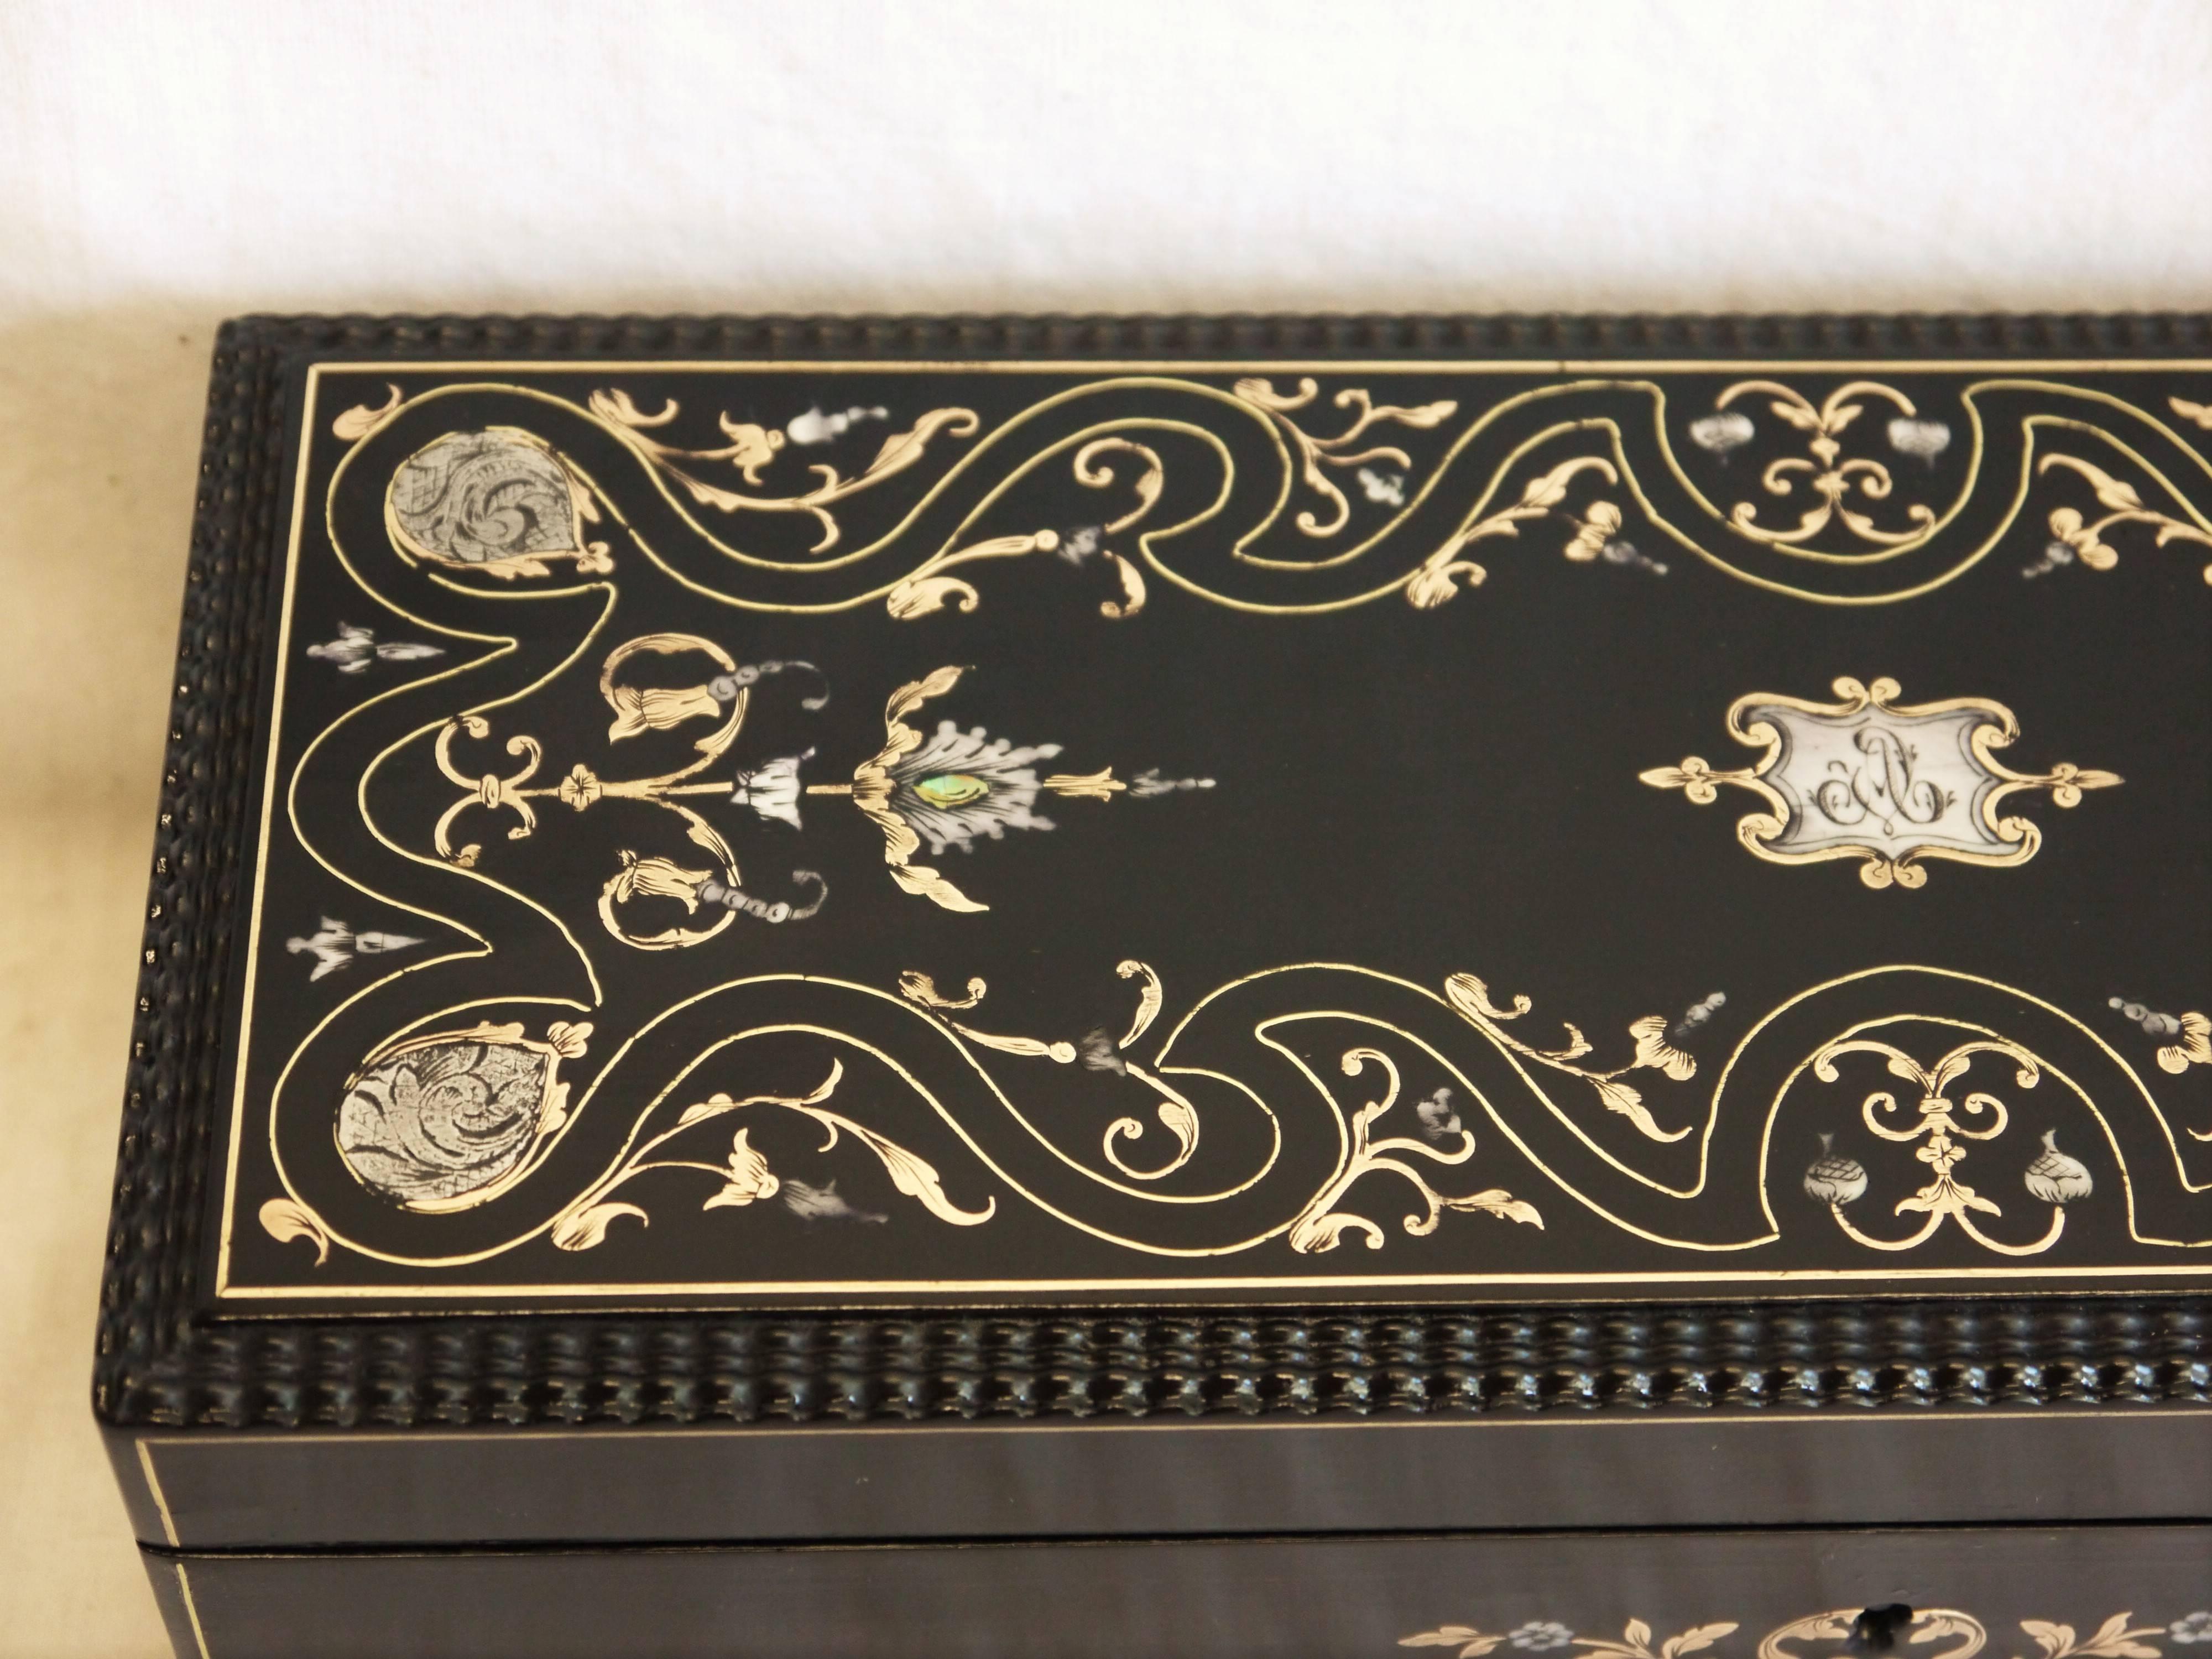 Gorgeous Napoleon III jewelry decorative box that used to be a gloves box, in Boulle style marquetry beautifully decorated in ebony, brass, pewter, bone and mother-of-pearl, France, circa 1885.
The inside part is made of gendered